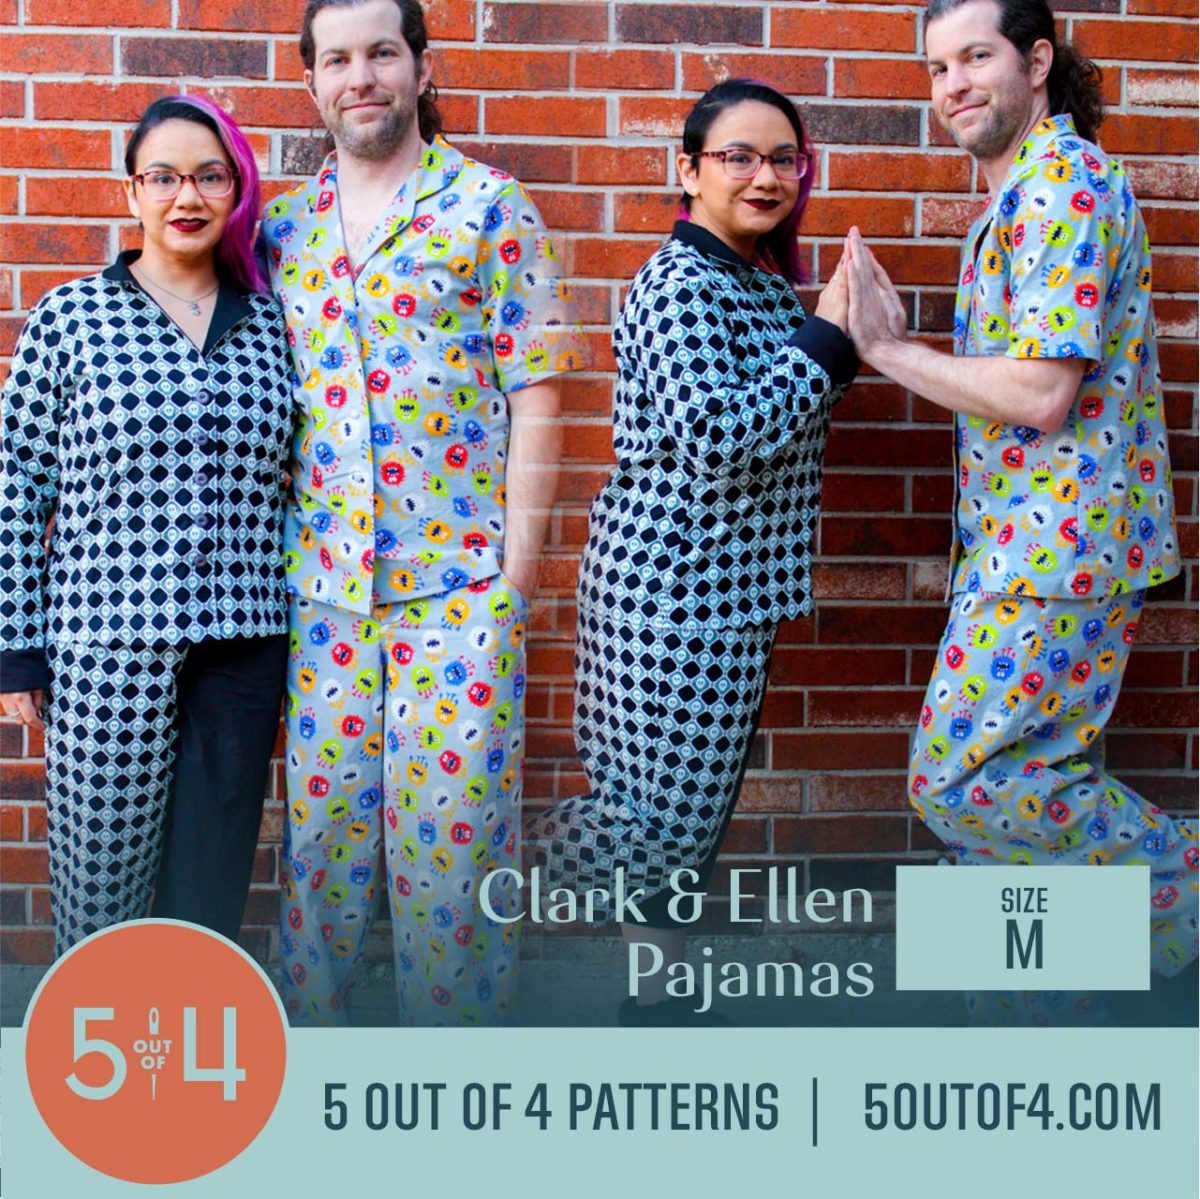 5oo4 Woven Pajama Pattern for Women and Men